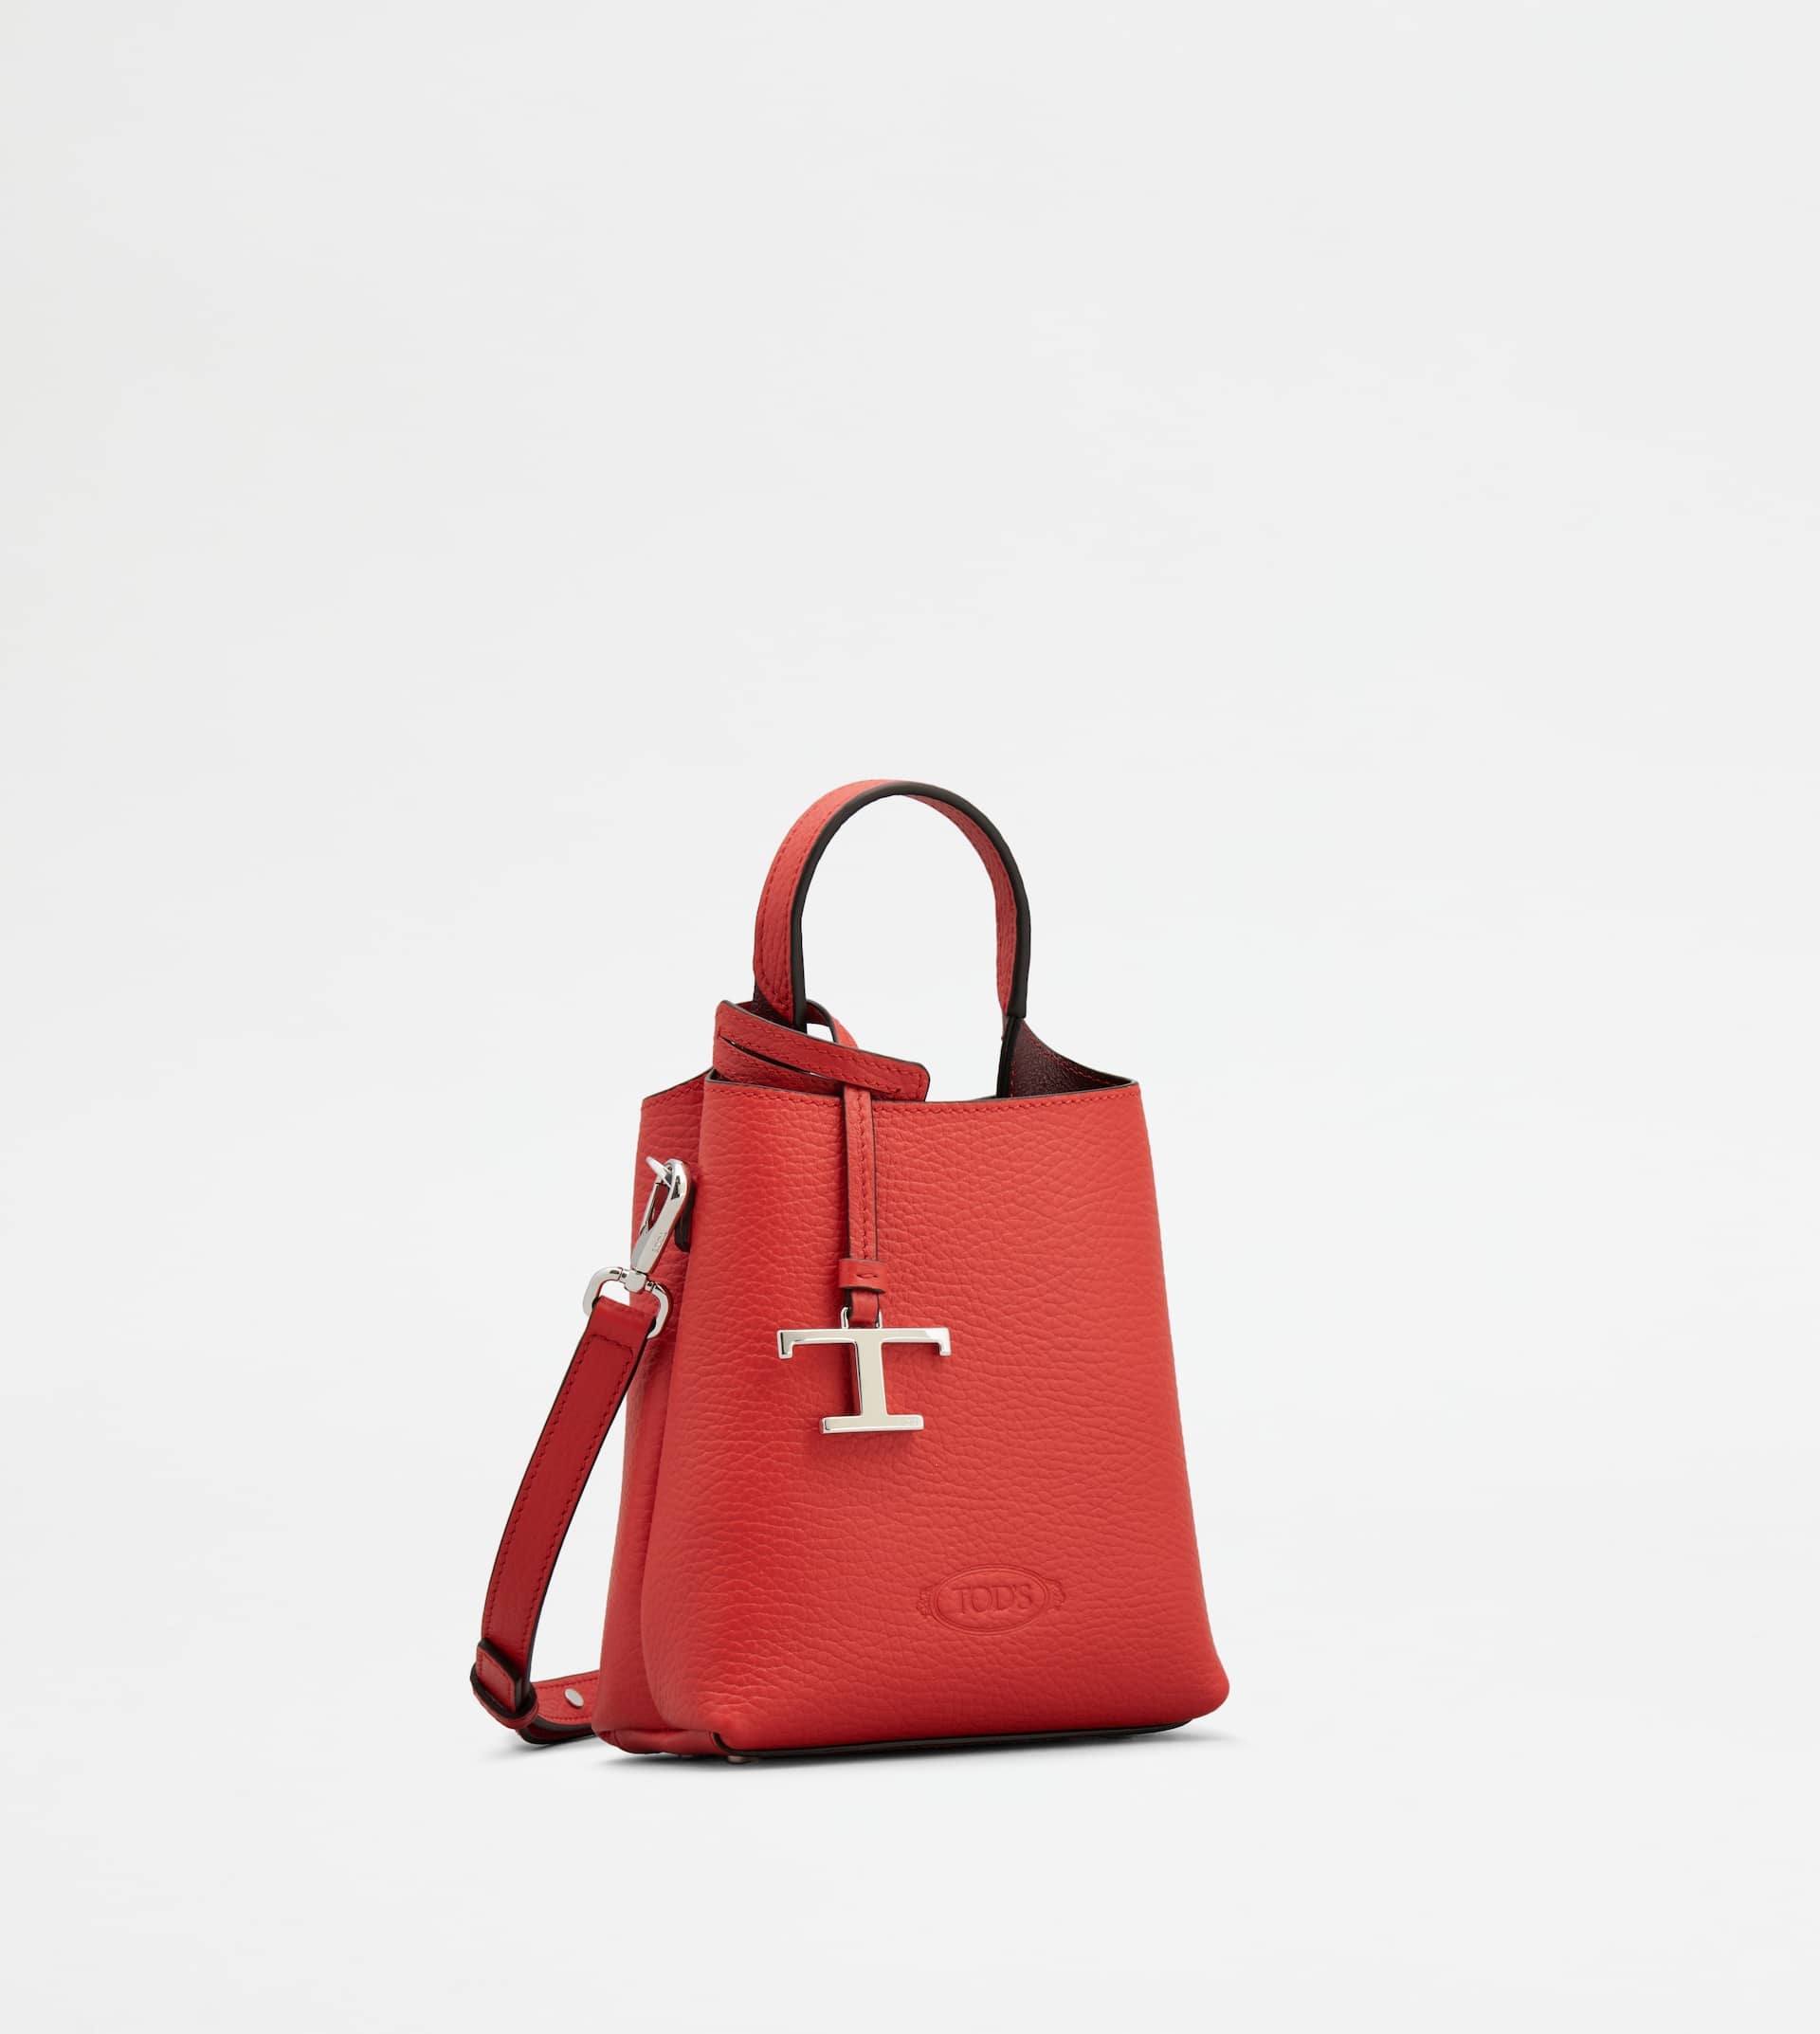 TOD'S MICRO BAG IN LEATHER - RED - 2